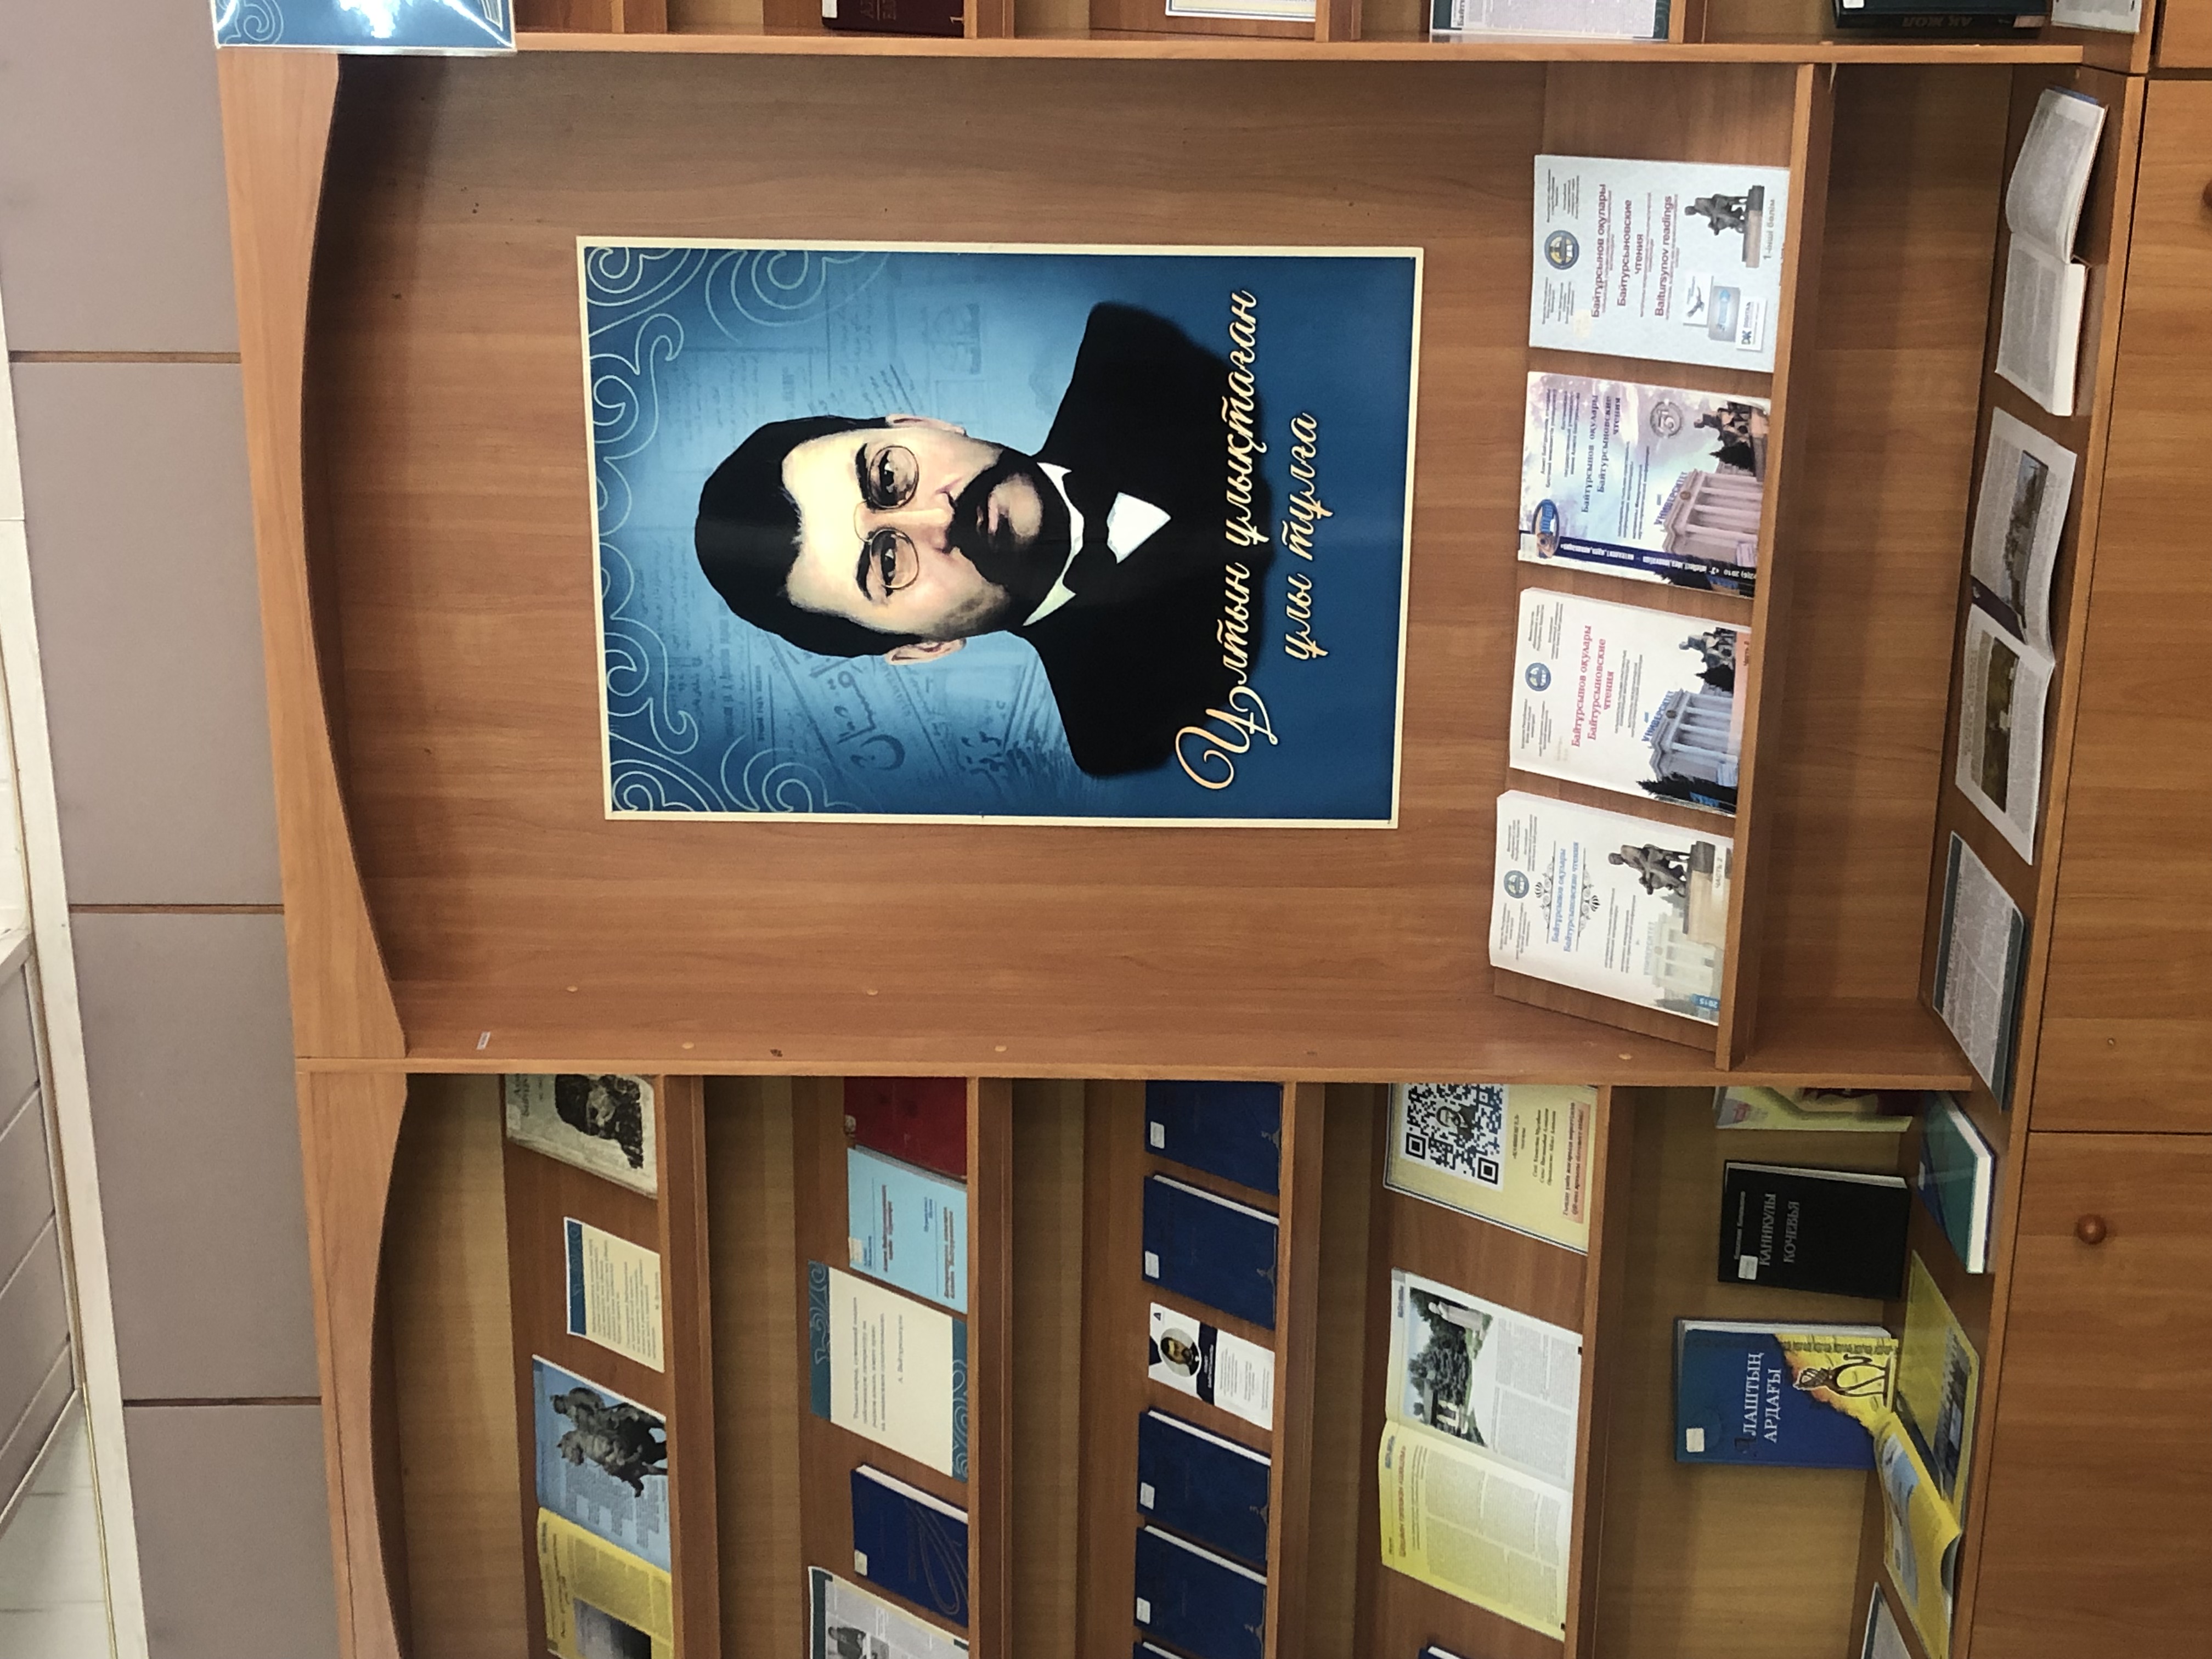 Employees of the Department of Justice visited the book exhibition dedicated to the 150th anniversary of Akhmet Baitursynov